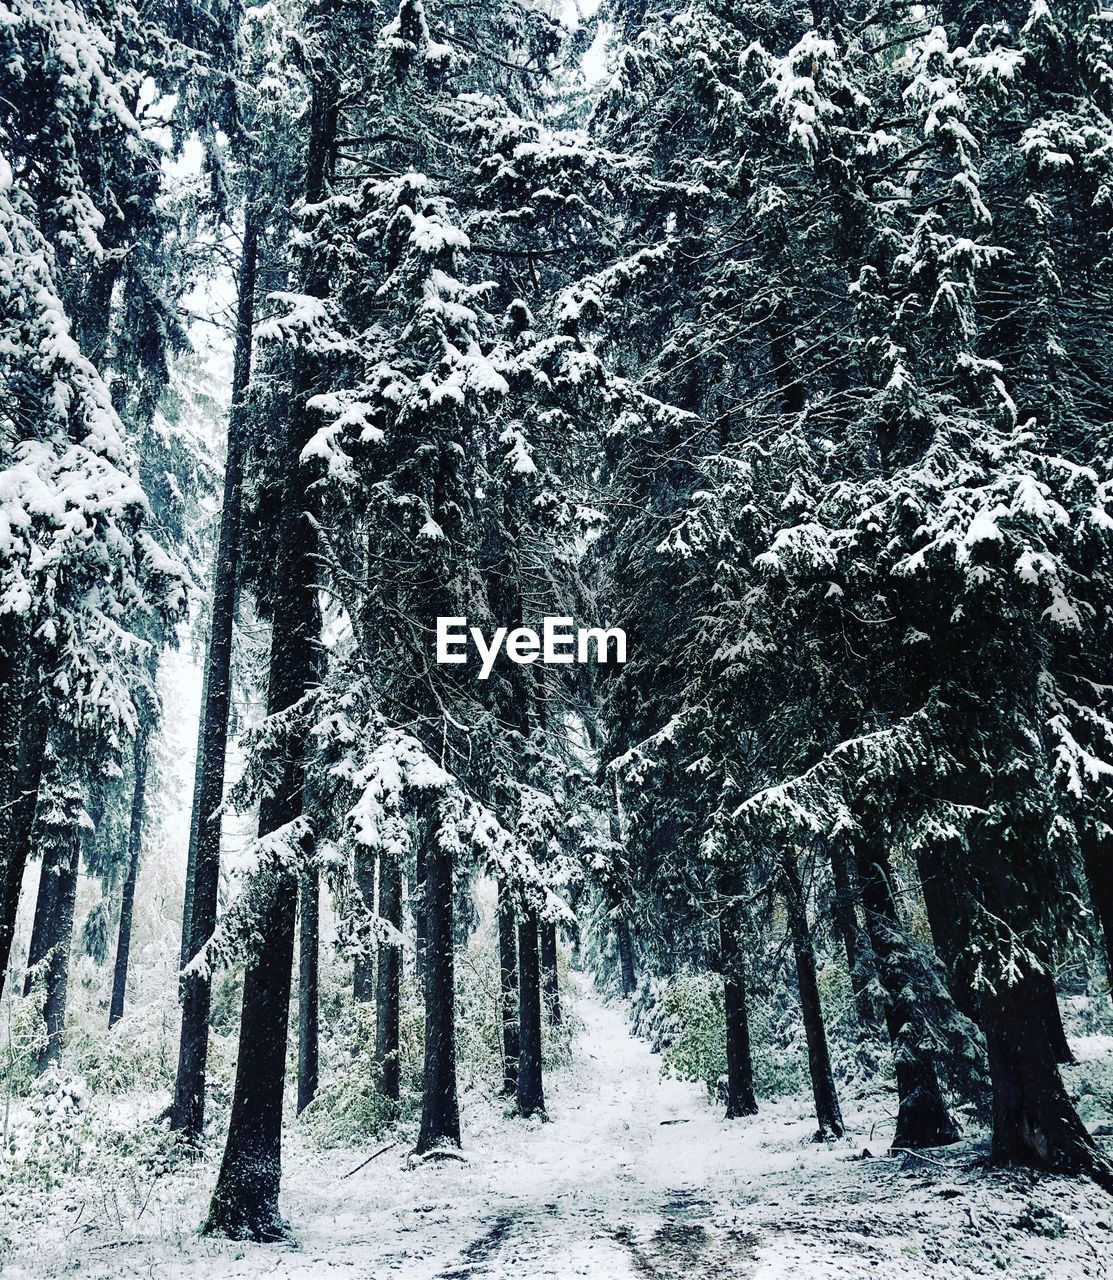 TREES IN SNOW COVERED FOREST